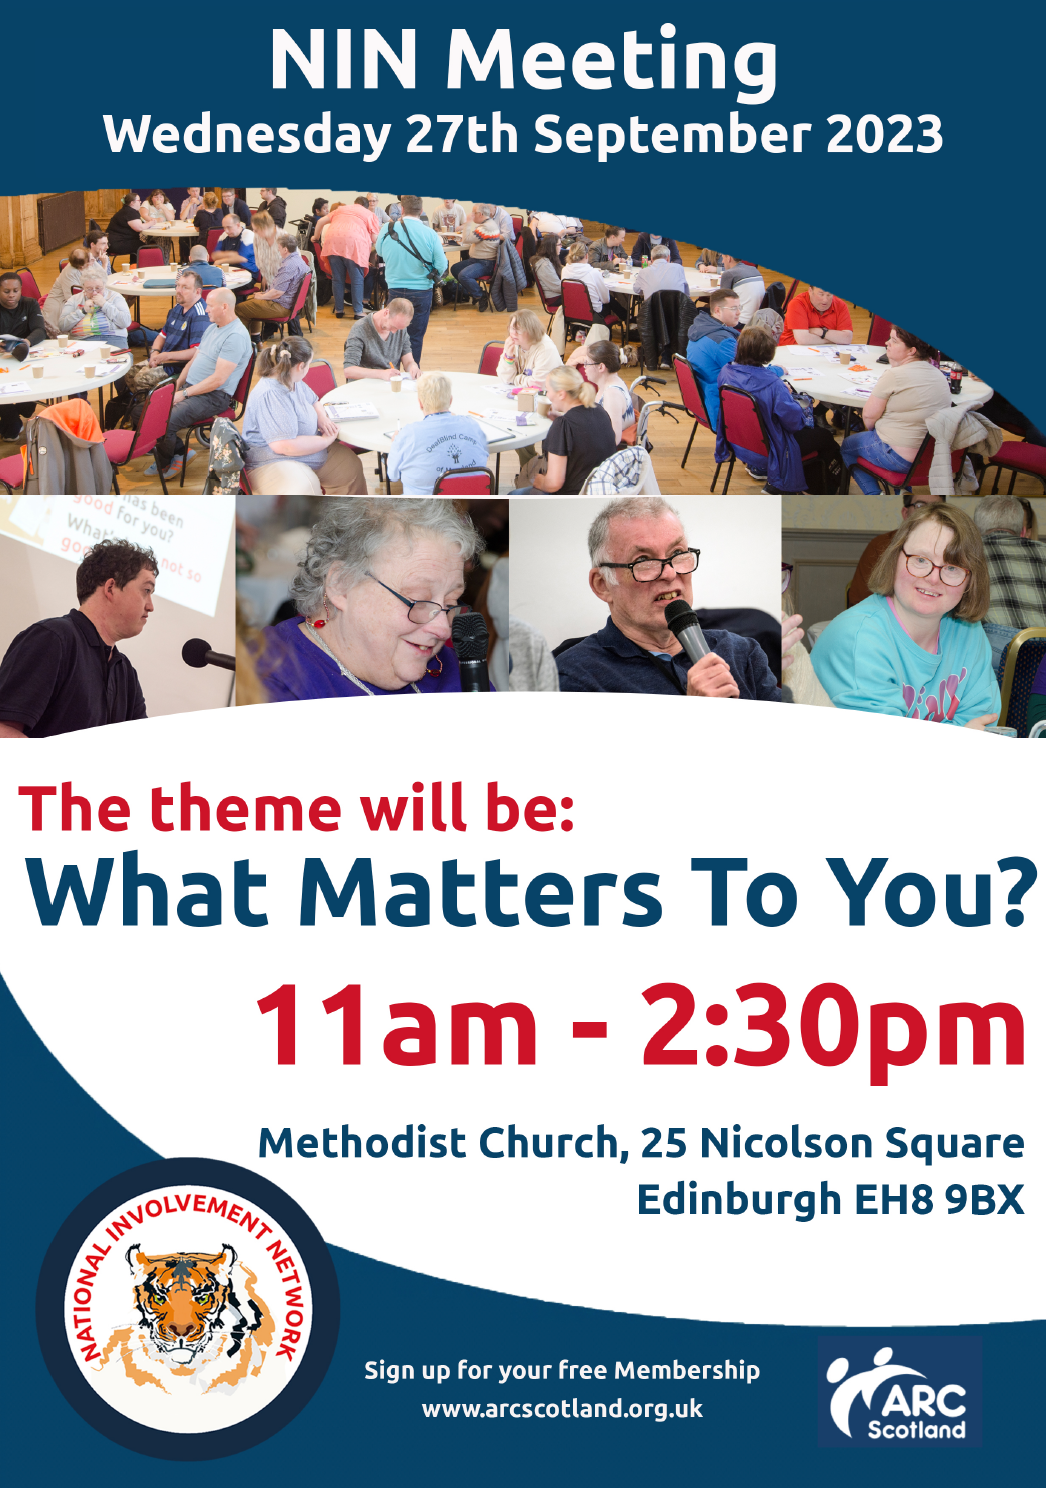 NIN Meeting Poster. Titled NIN Meeting, Wednesday 27th September 2023. Then is a photo of a busy room followed by 4 photos of faces. Then text reads The theme will be What Matters To You? 11am to 2.30pm. Methodist Church, 25 Nicolson Square, Edinburgh, EH8 9BX. The NIN logo (a tiger) is in the bottom left and the ARC scotland logo is in the bottom right. Text reads sign up for your free membership. www dot arc scotland dot org dot uk.